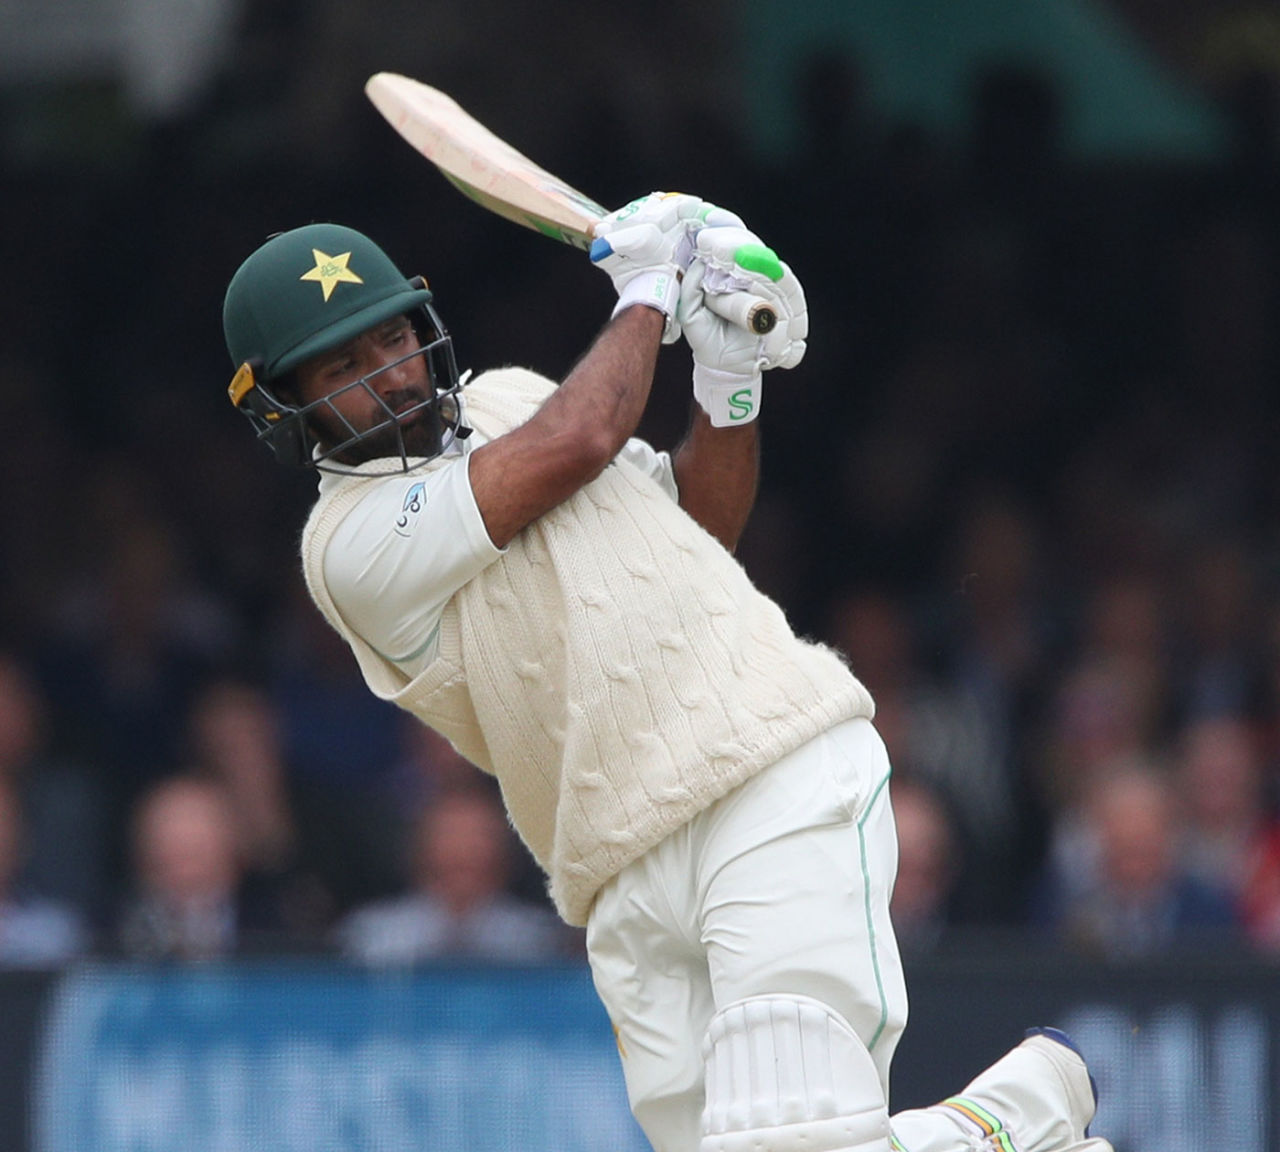 Asad Shafiq goes through the leg side, England v Pakistan, 1st Test, Lord's, 2nd day, May 25, 2018